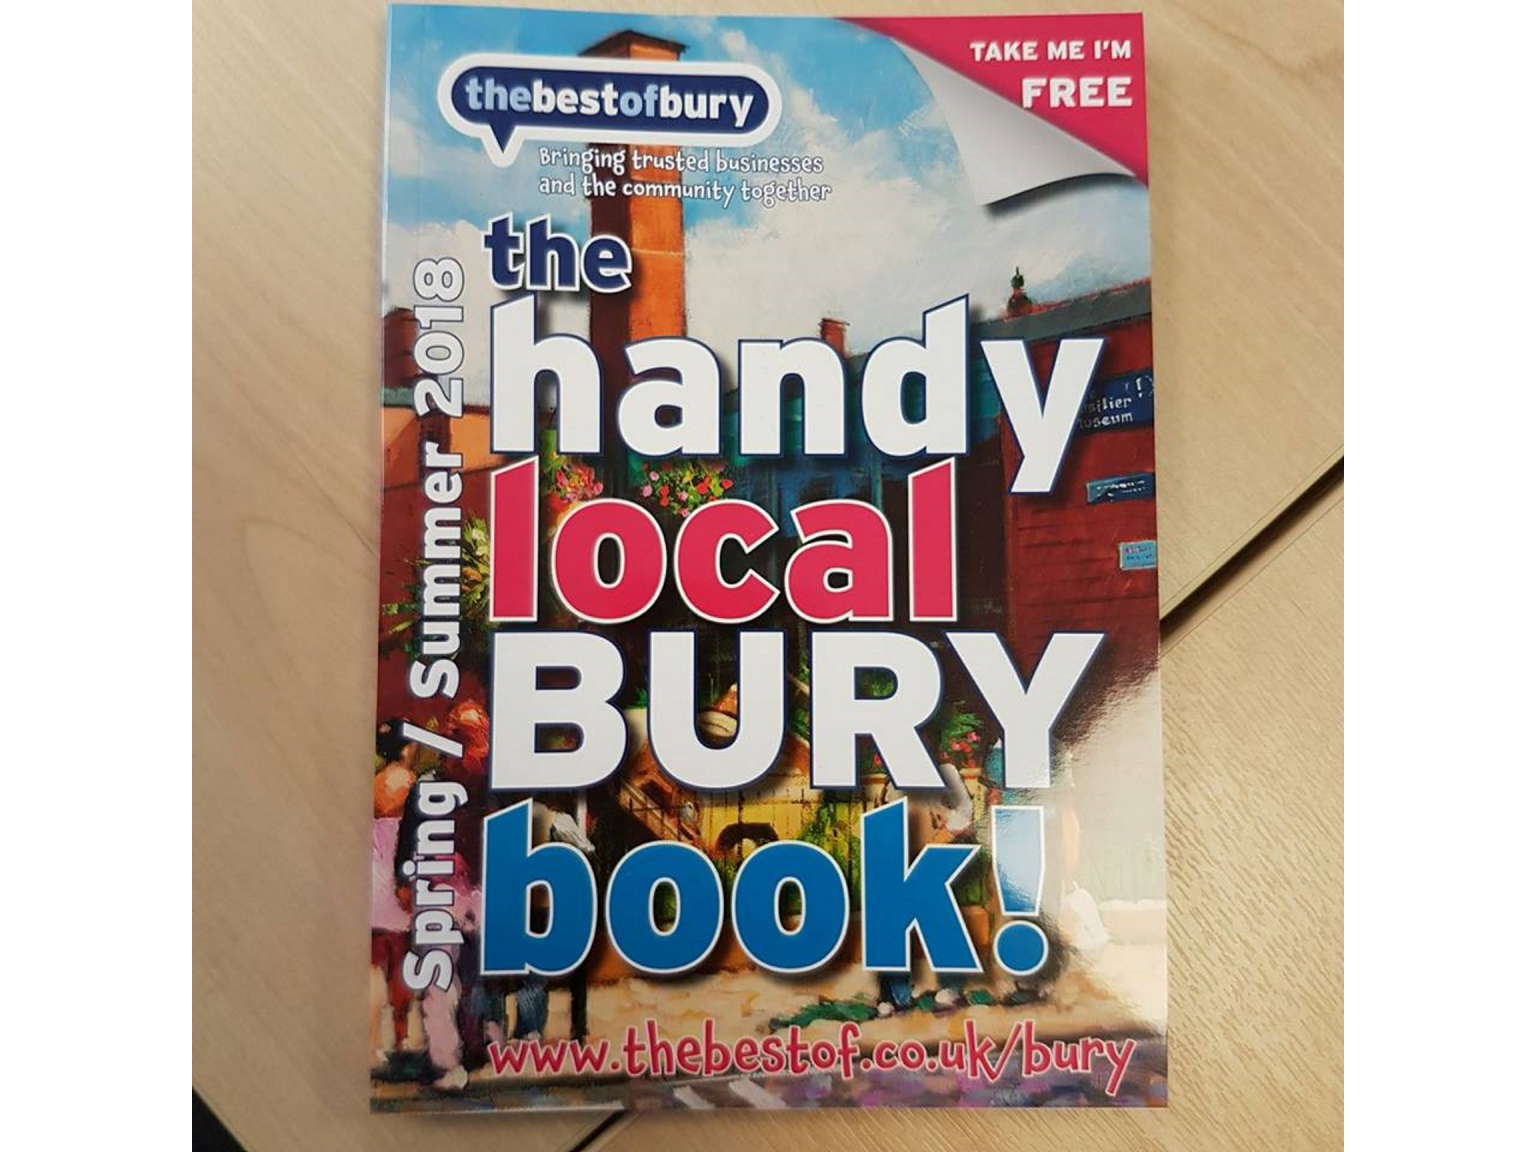 Have You Picked Up Your Copy Of Our Handy Local Bury Book Yet